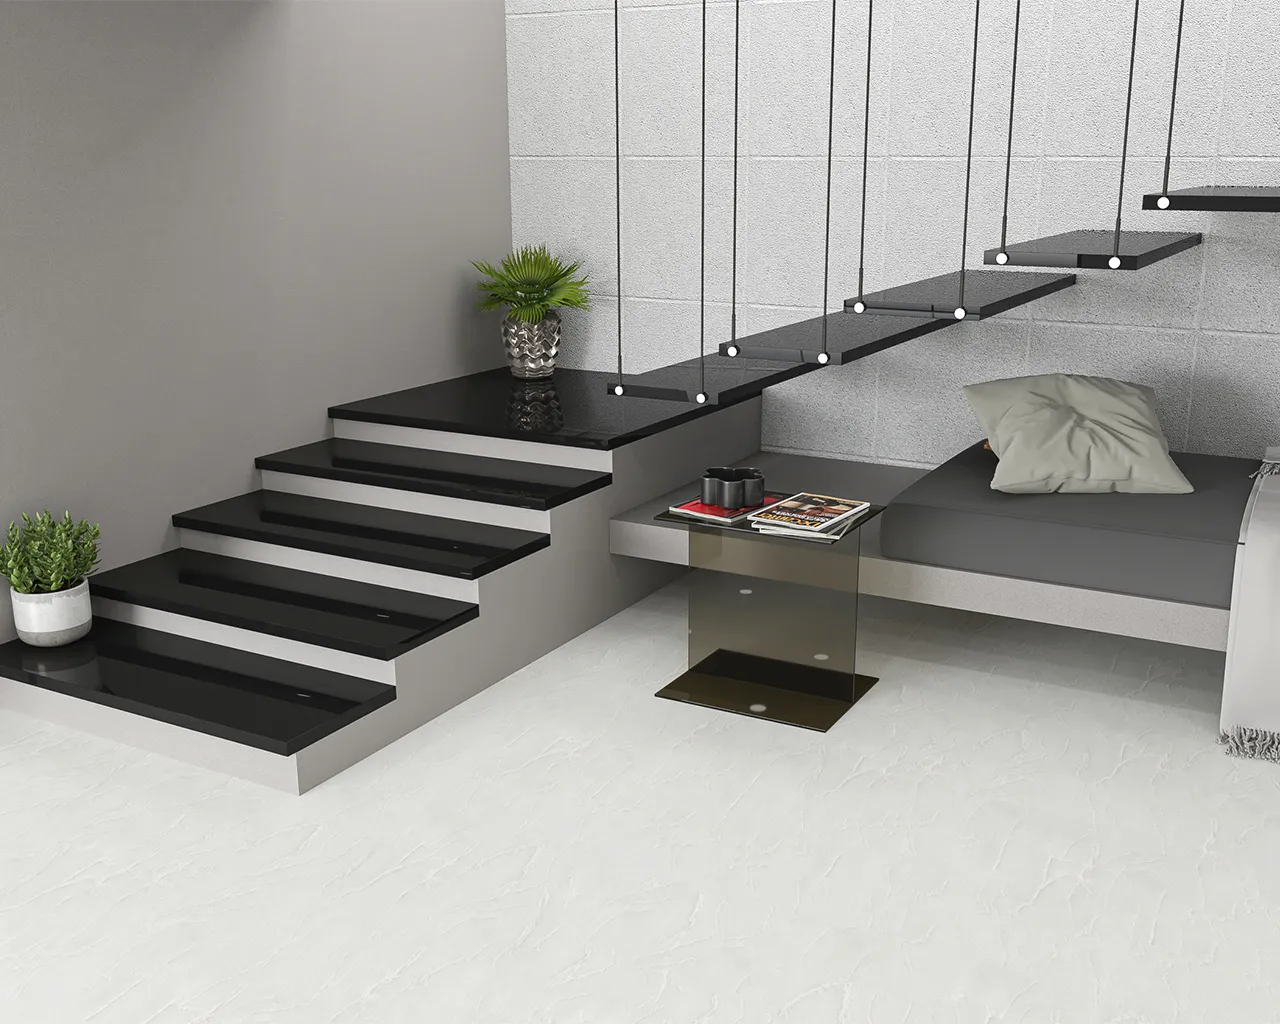 Stair Tiles Manufacturer in India